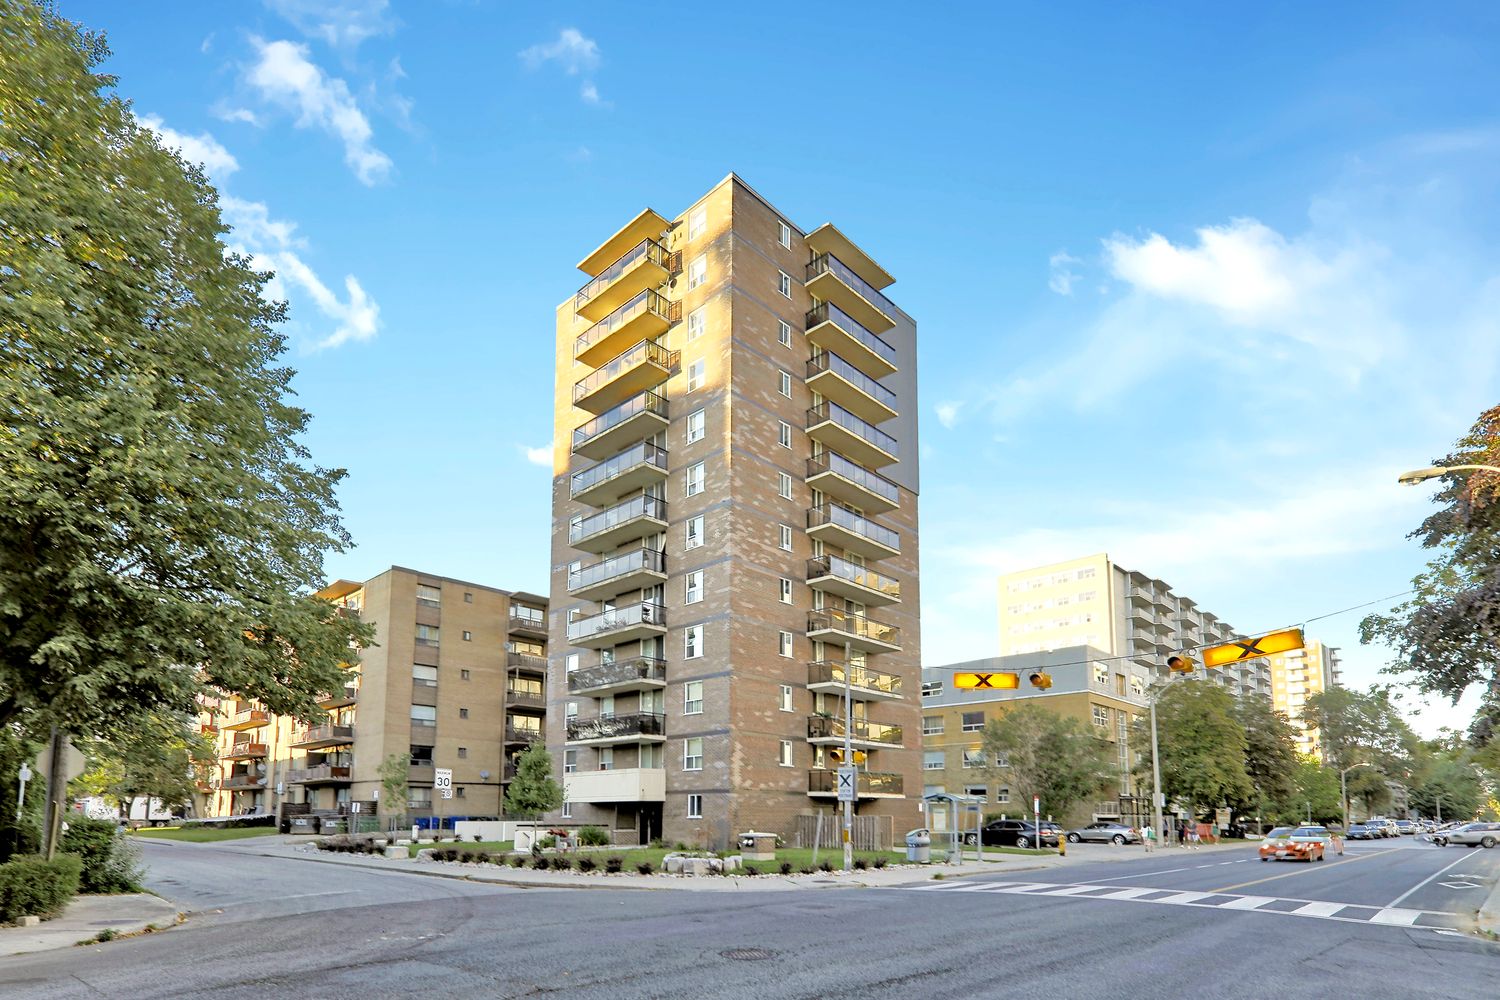 1145 Logan Ave. This condo at 1145 Logan Avenue Condos is located in  East York, Toronto - image #1 of 4 by Strata.ca